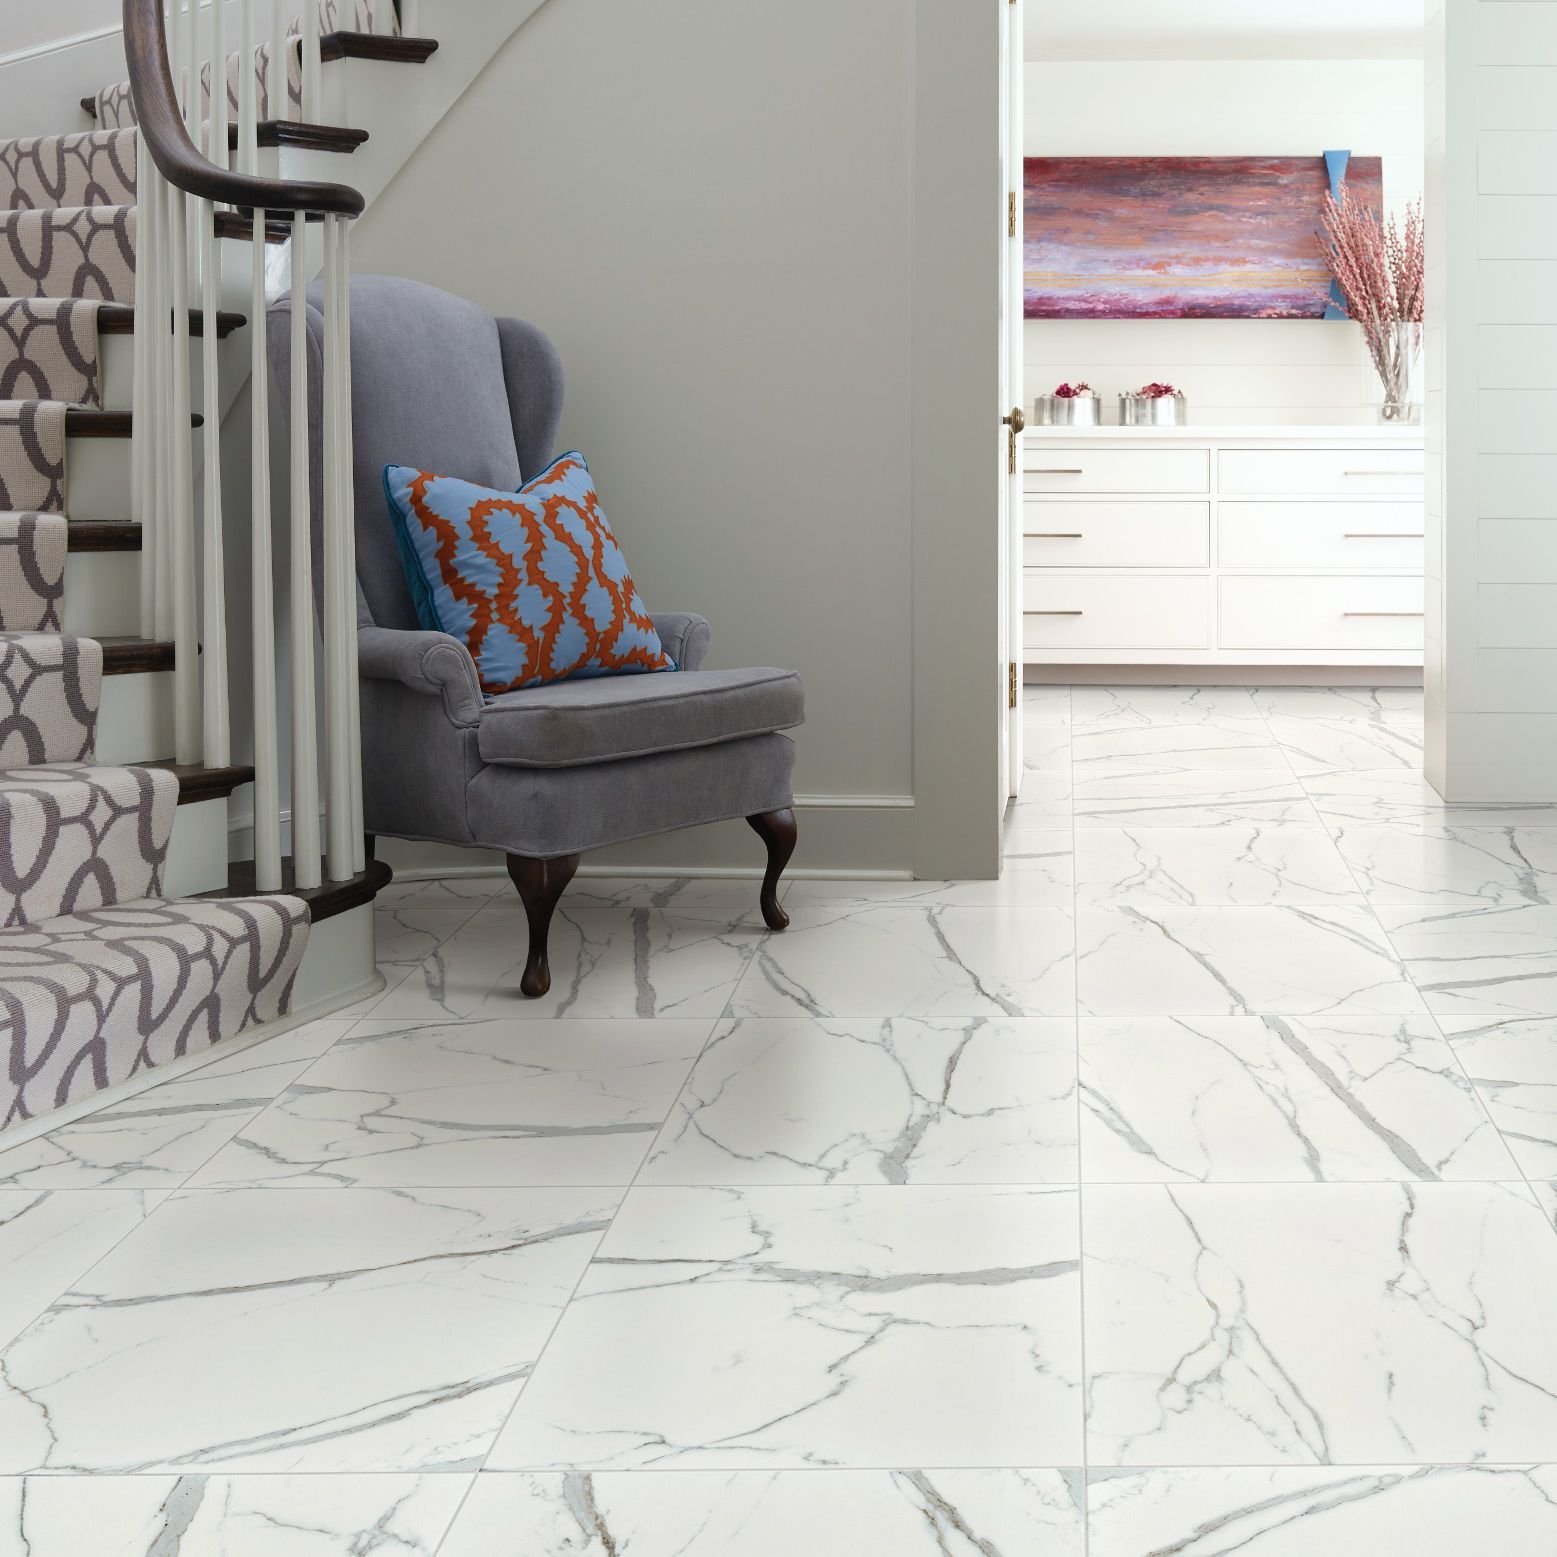 Tile & stone trends article provided by Floors By Sterling Hight